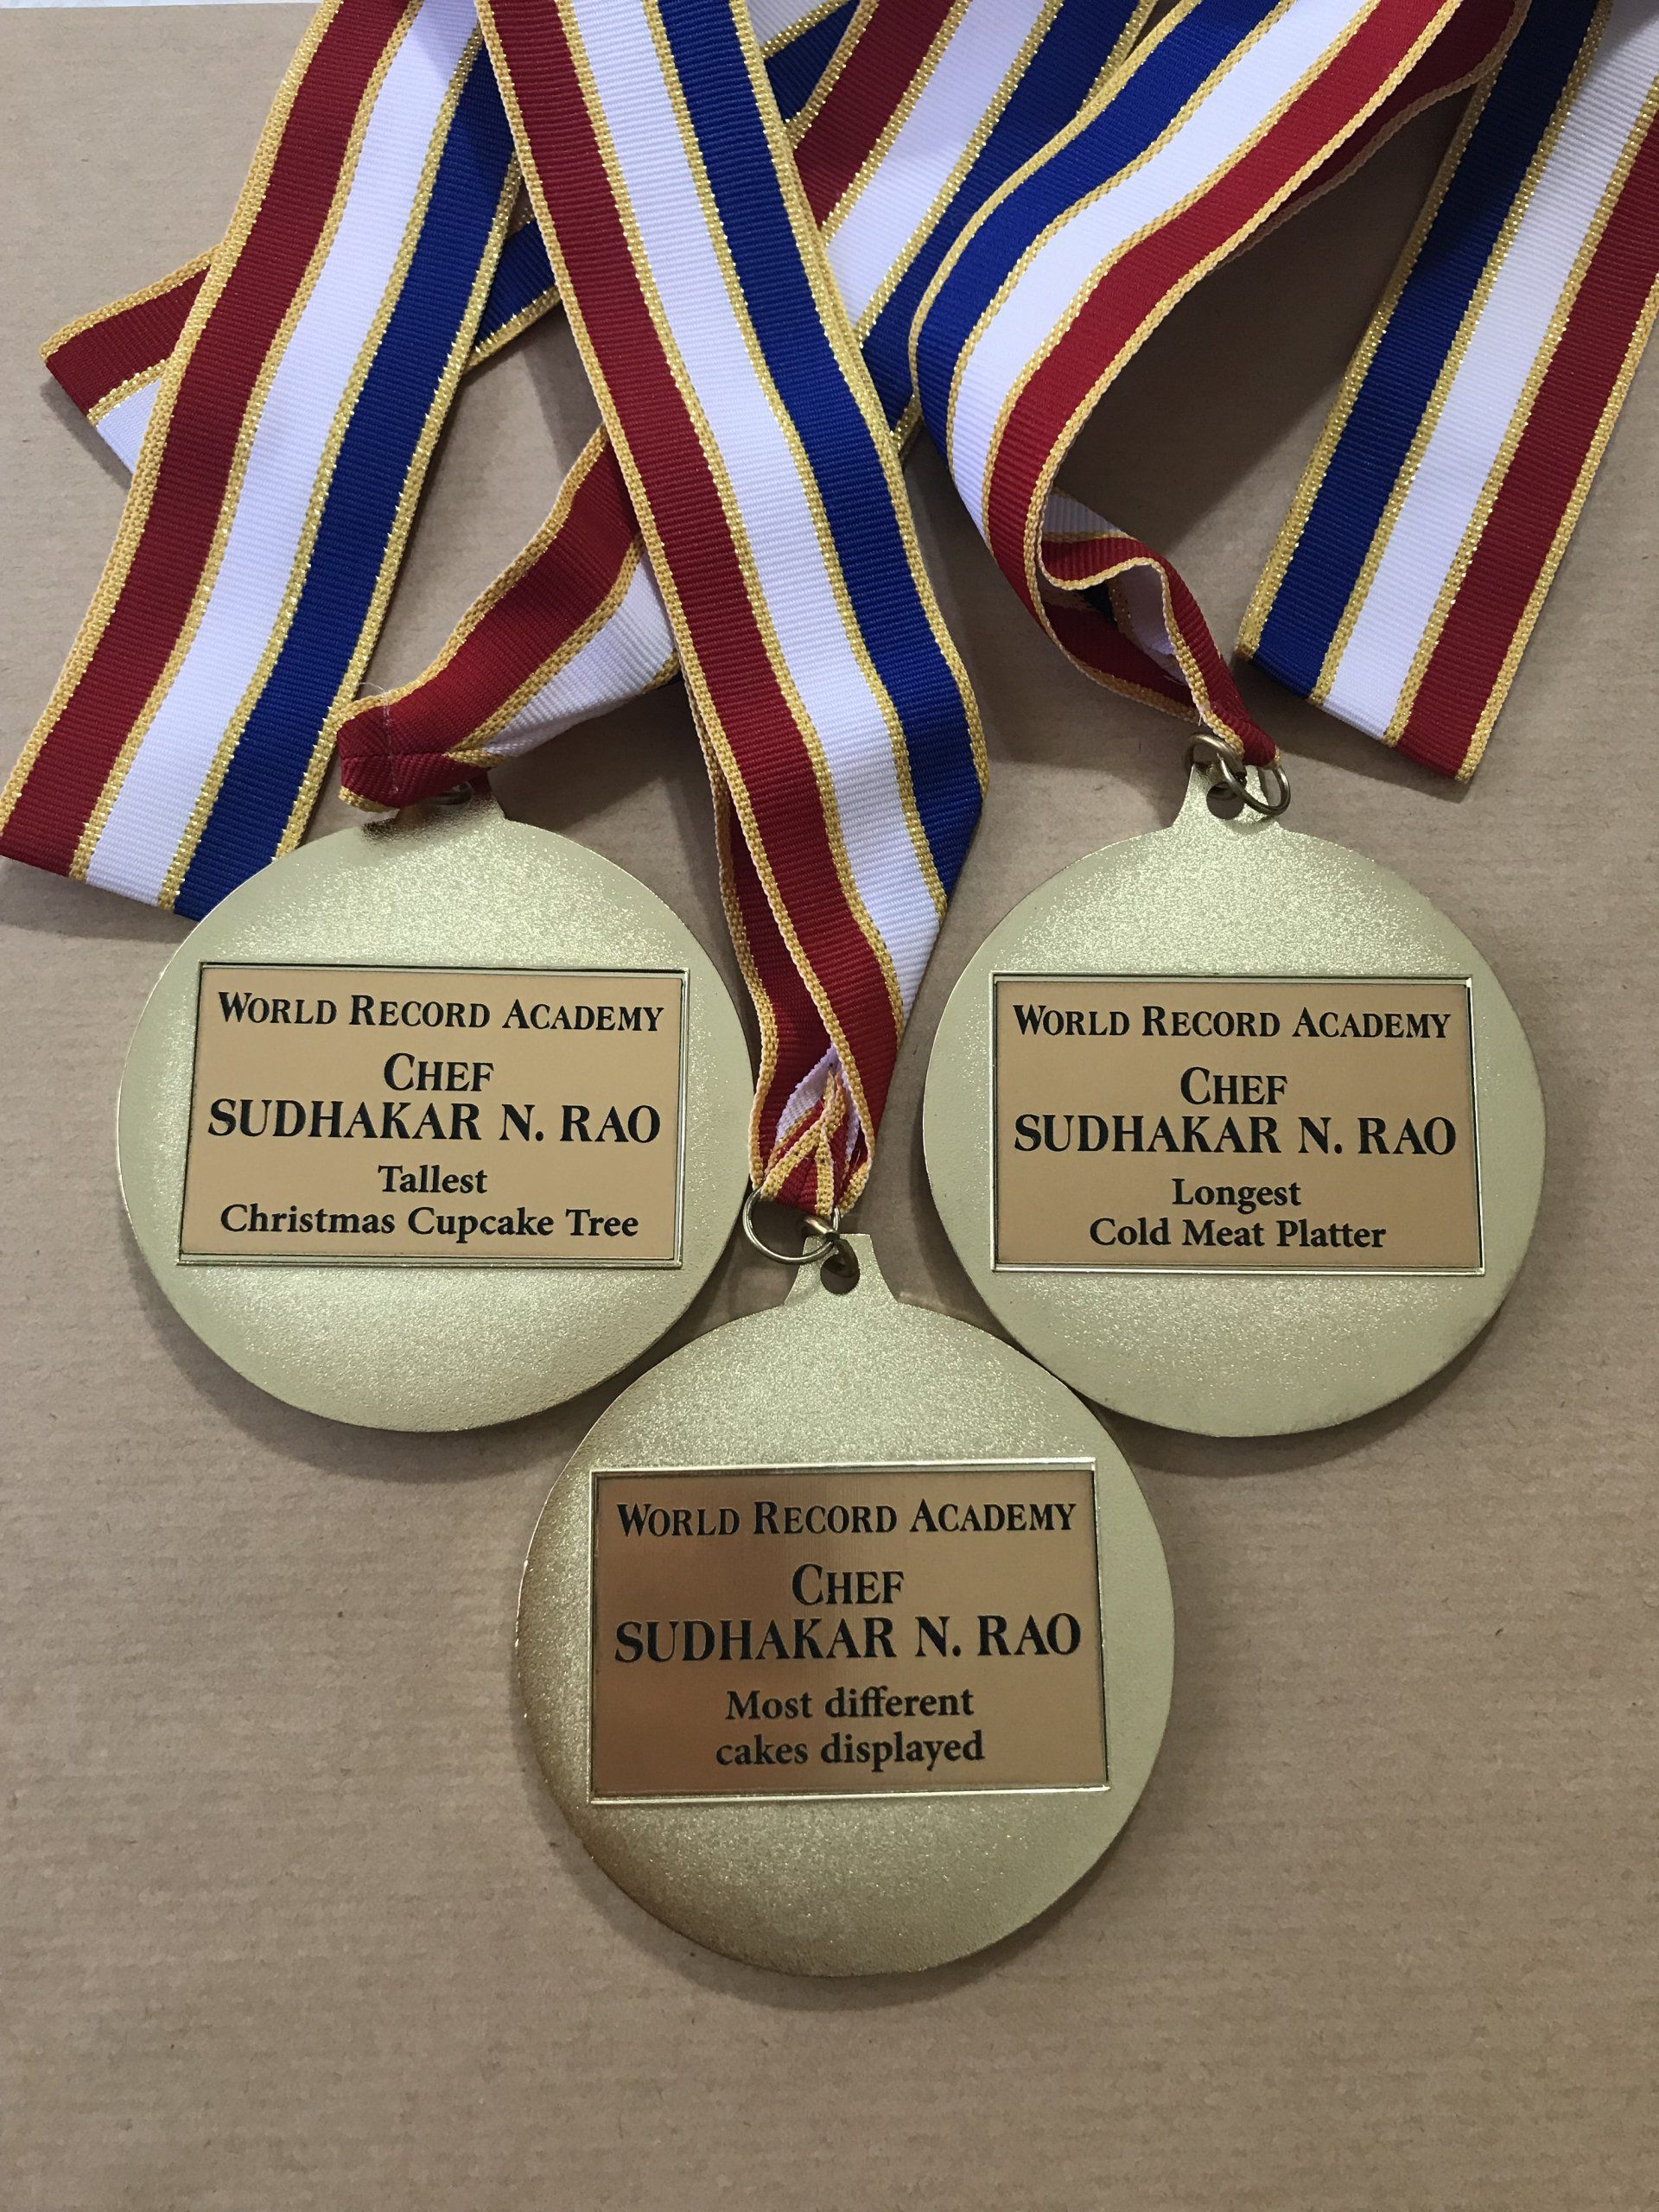 personalized world record holder medals for Chef Sudhakar N. Rao.